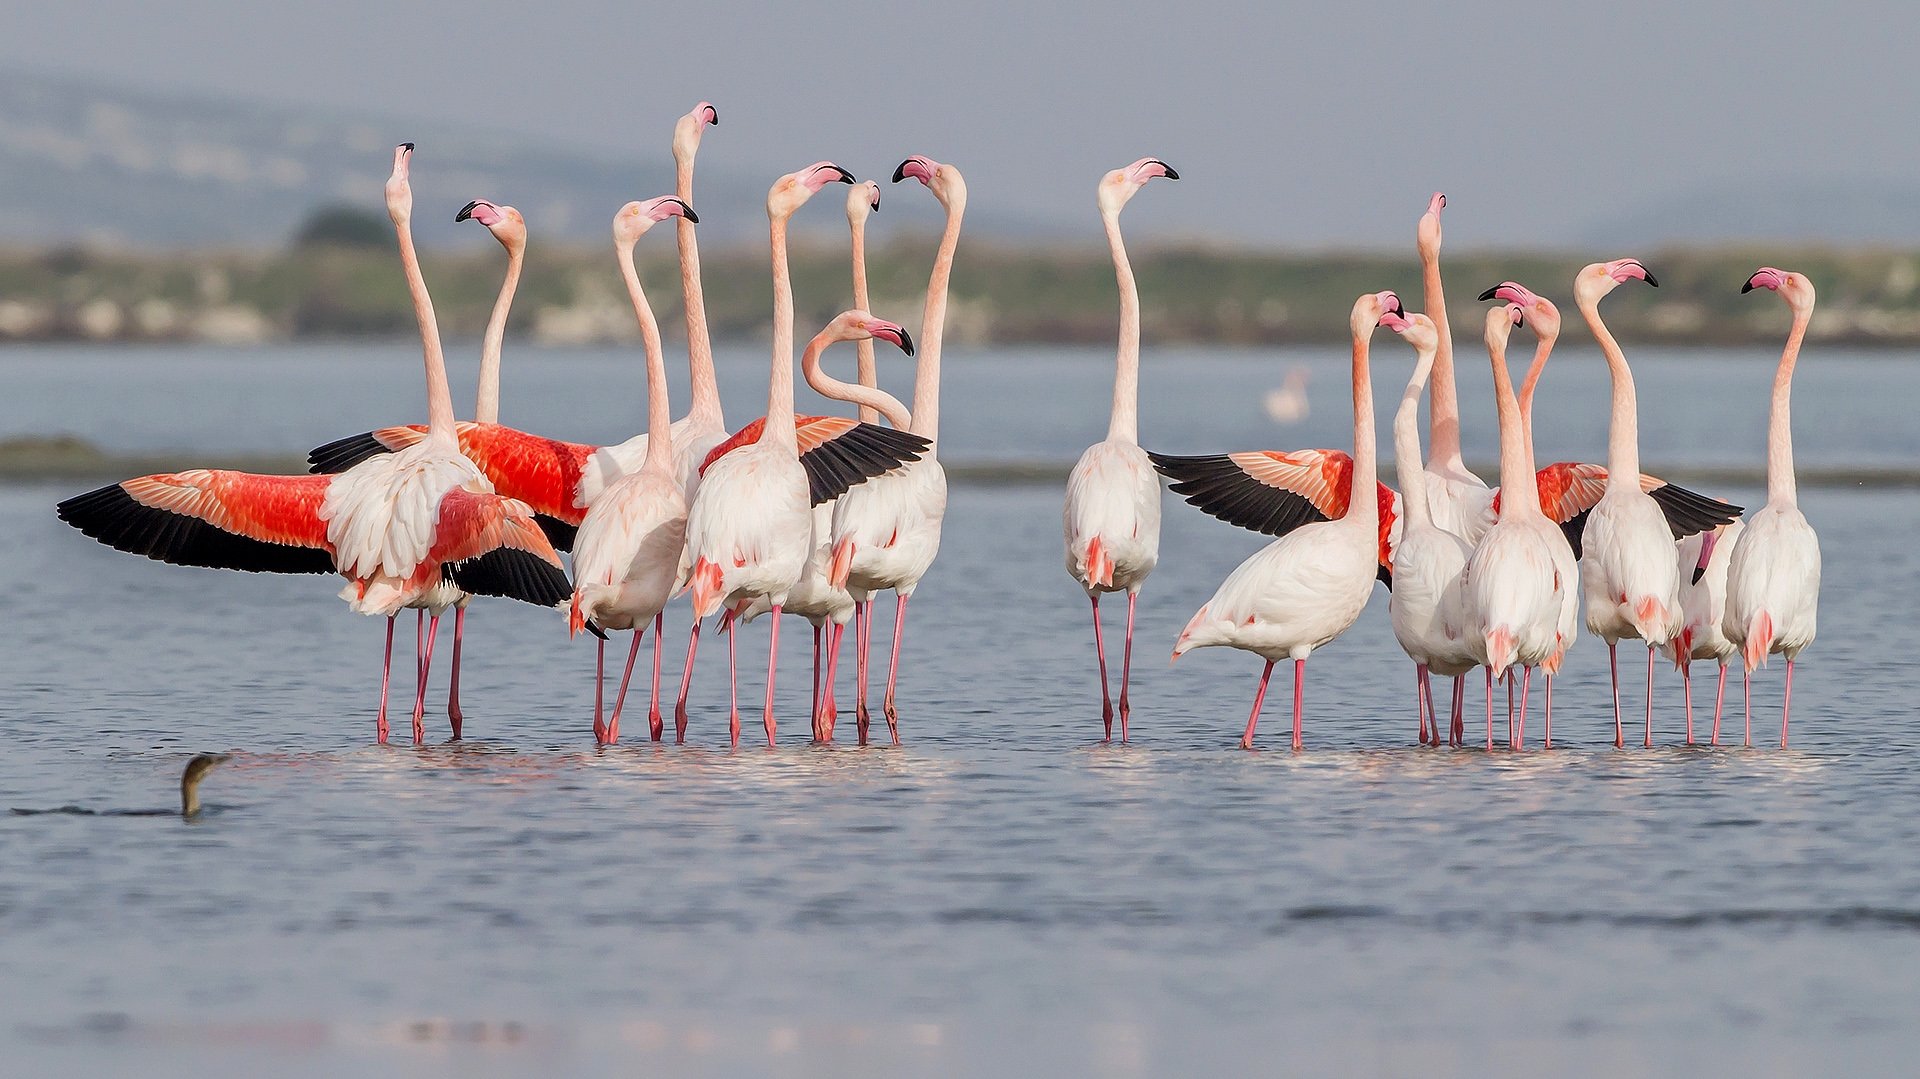 The Gediz Delta is home to around 10% of the world's flamingo population.